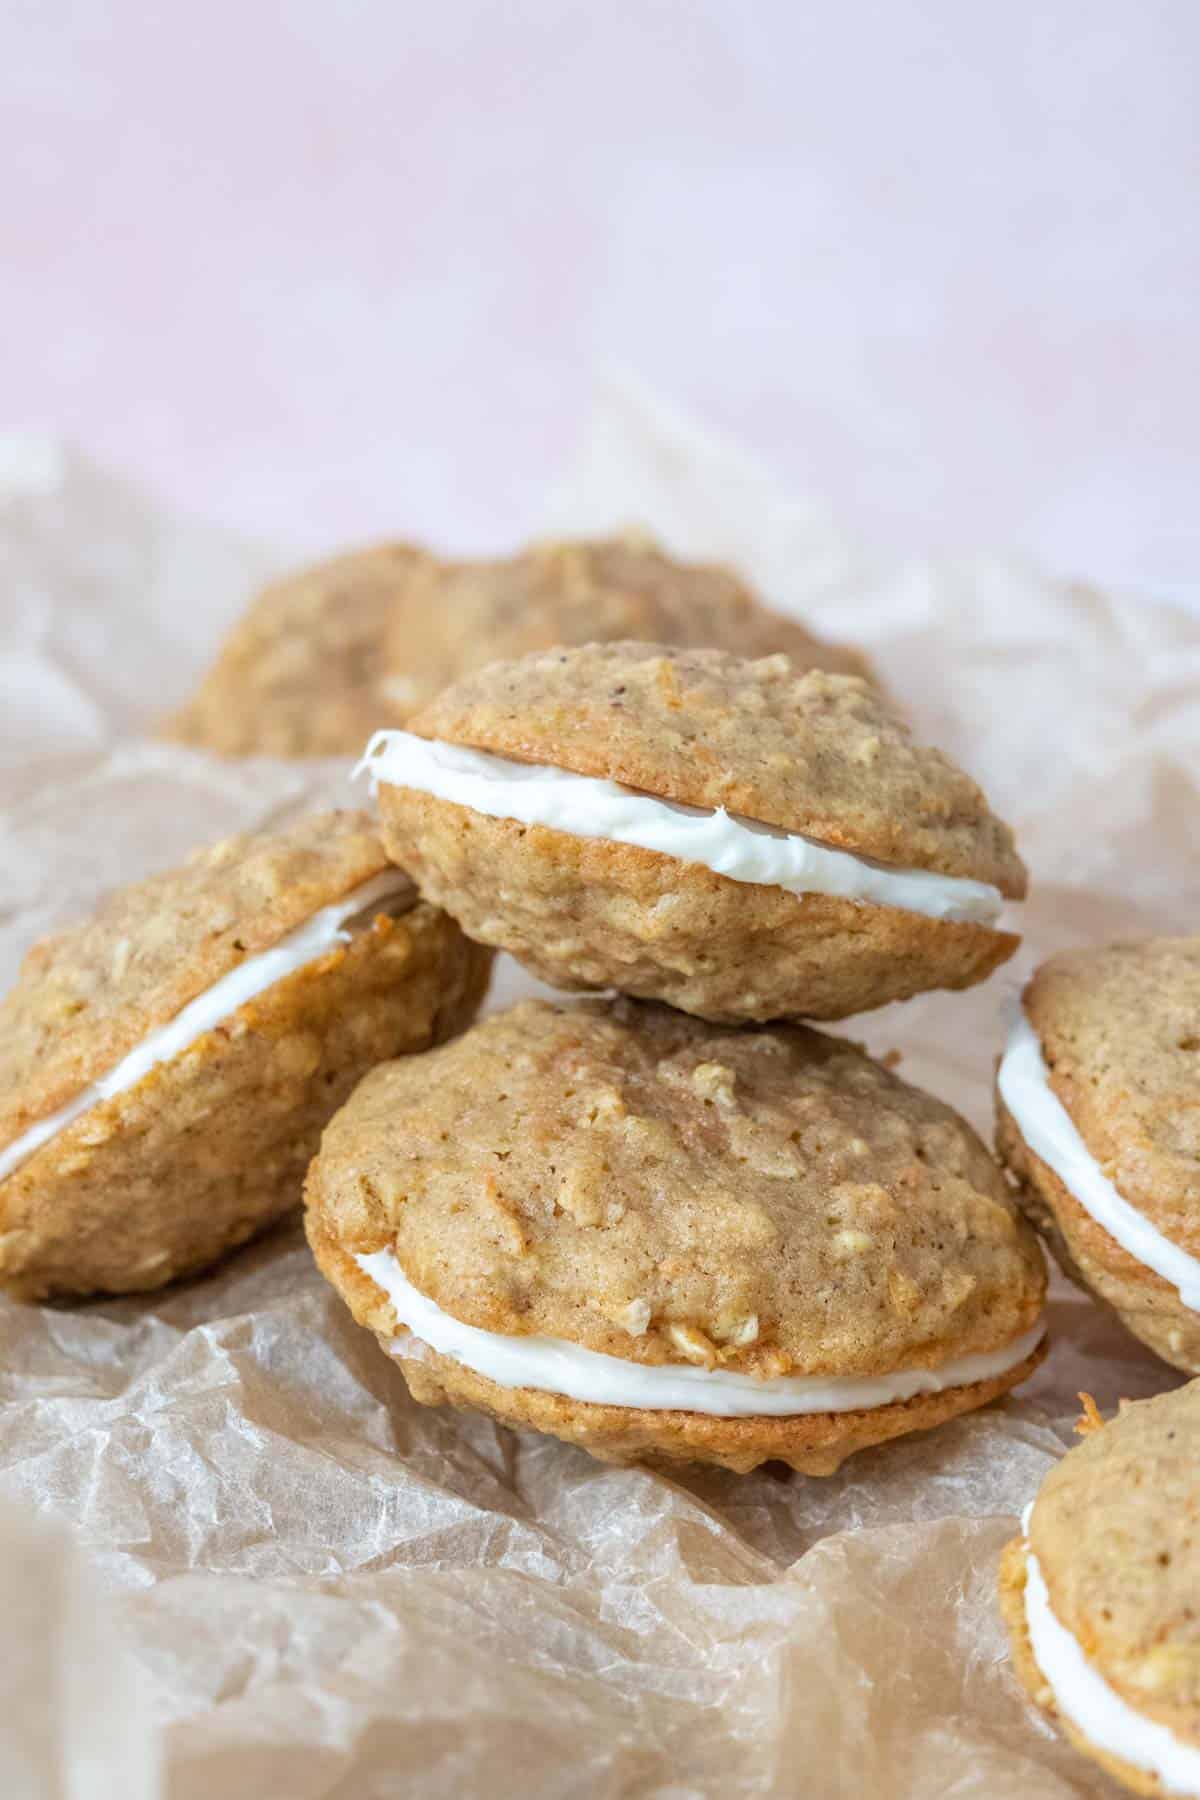 Pile of carrot cake cookies on parchment paper.